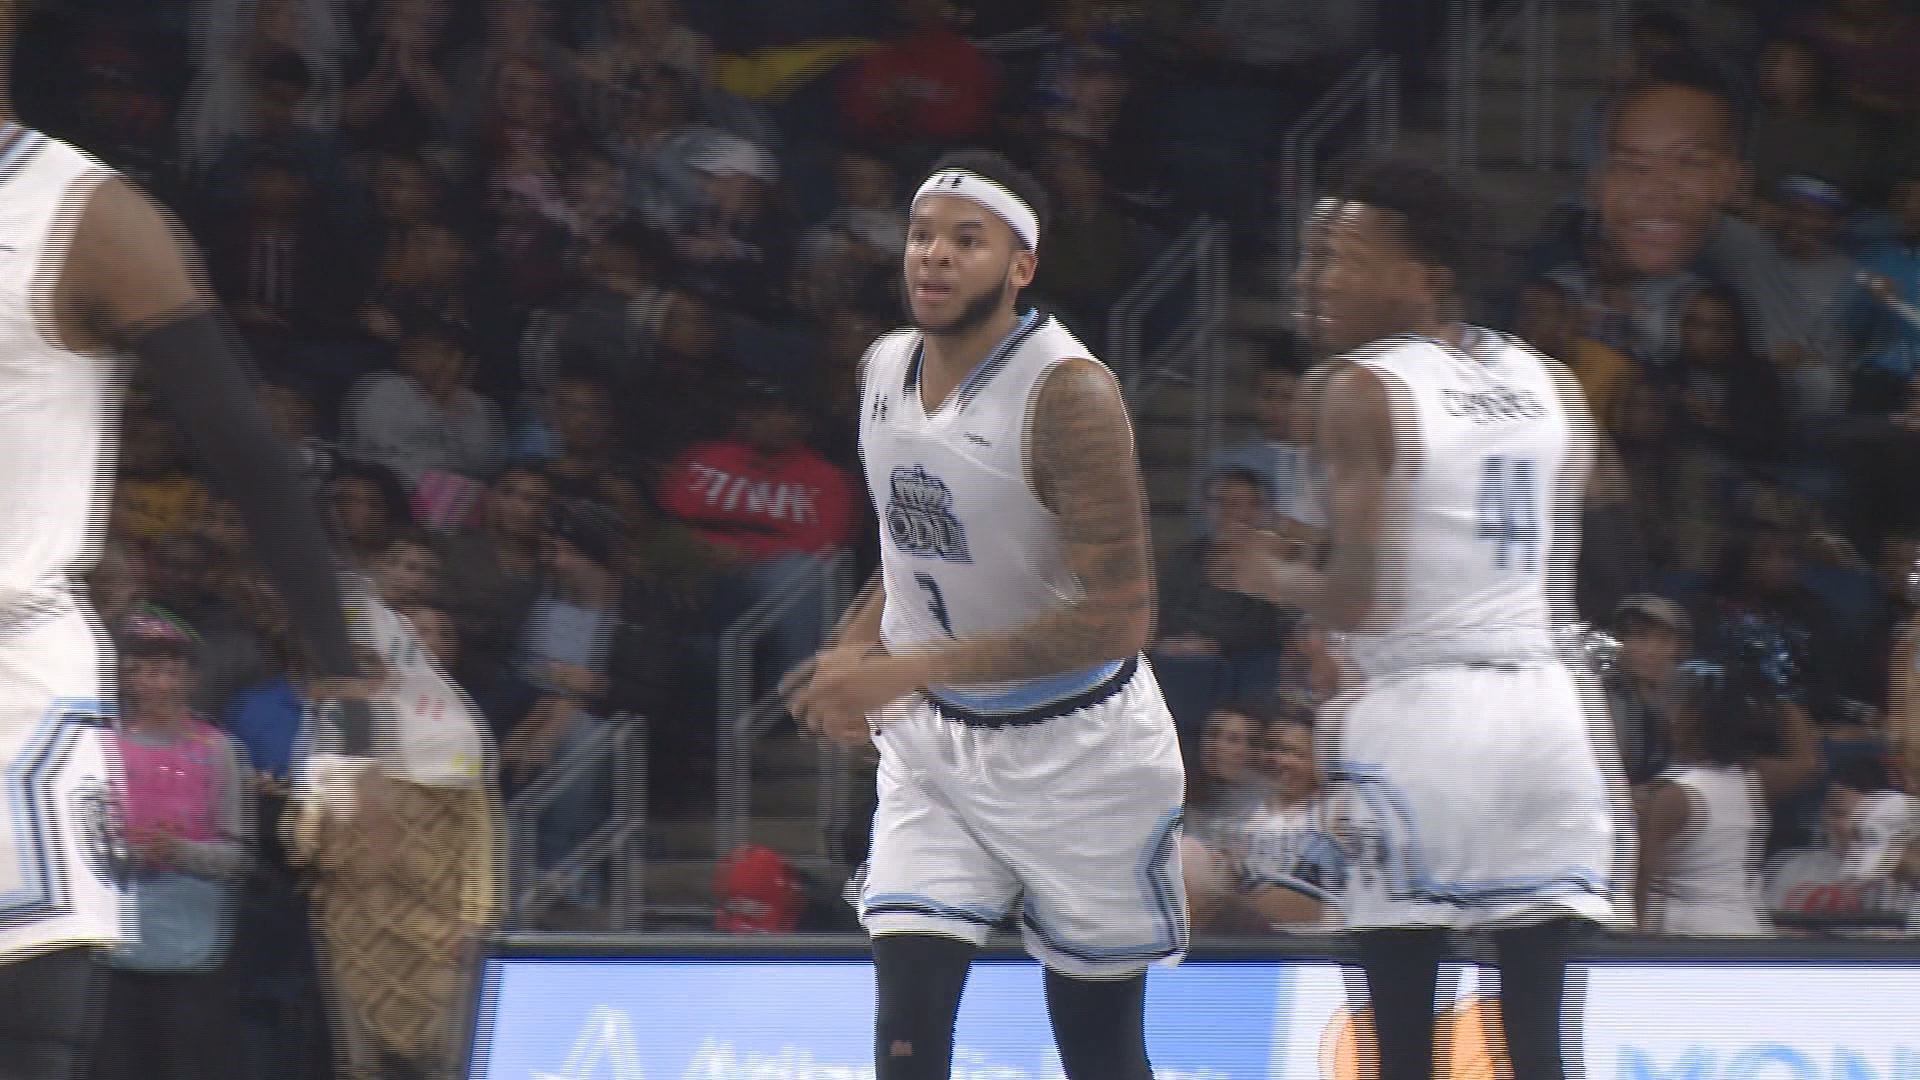 ODU's backcourt combo of Stith and Caver have provided plenty for the Monarchs this season.